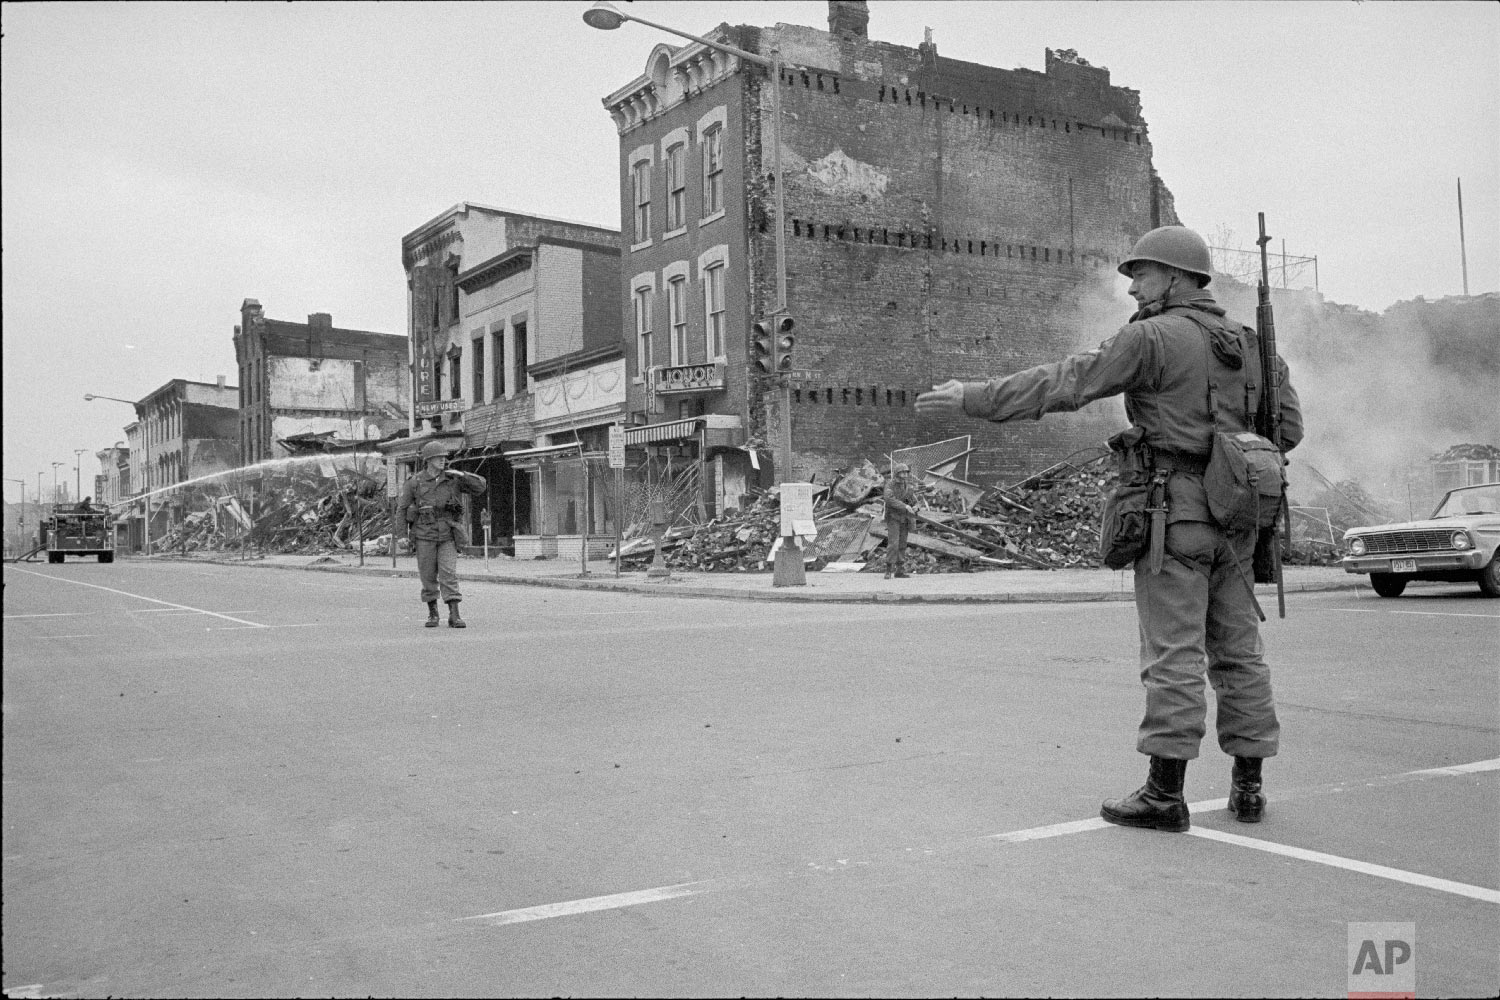  Photograph showing a soldier standing guard at 7th and N Street, N.W., Washington, D.C., Monday, April 8, 1968, with the ruins of buildings that were destroyed during the riots that followed the assassination of Martin Luther King, Jr. (Photo/ Warre